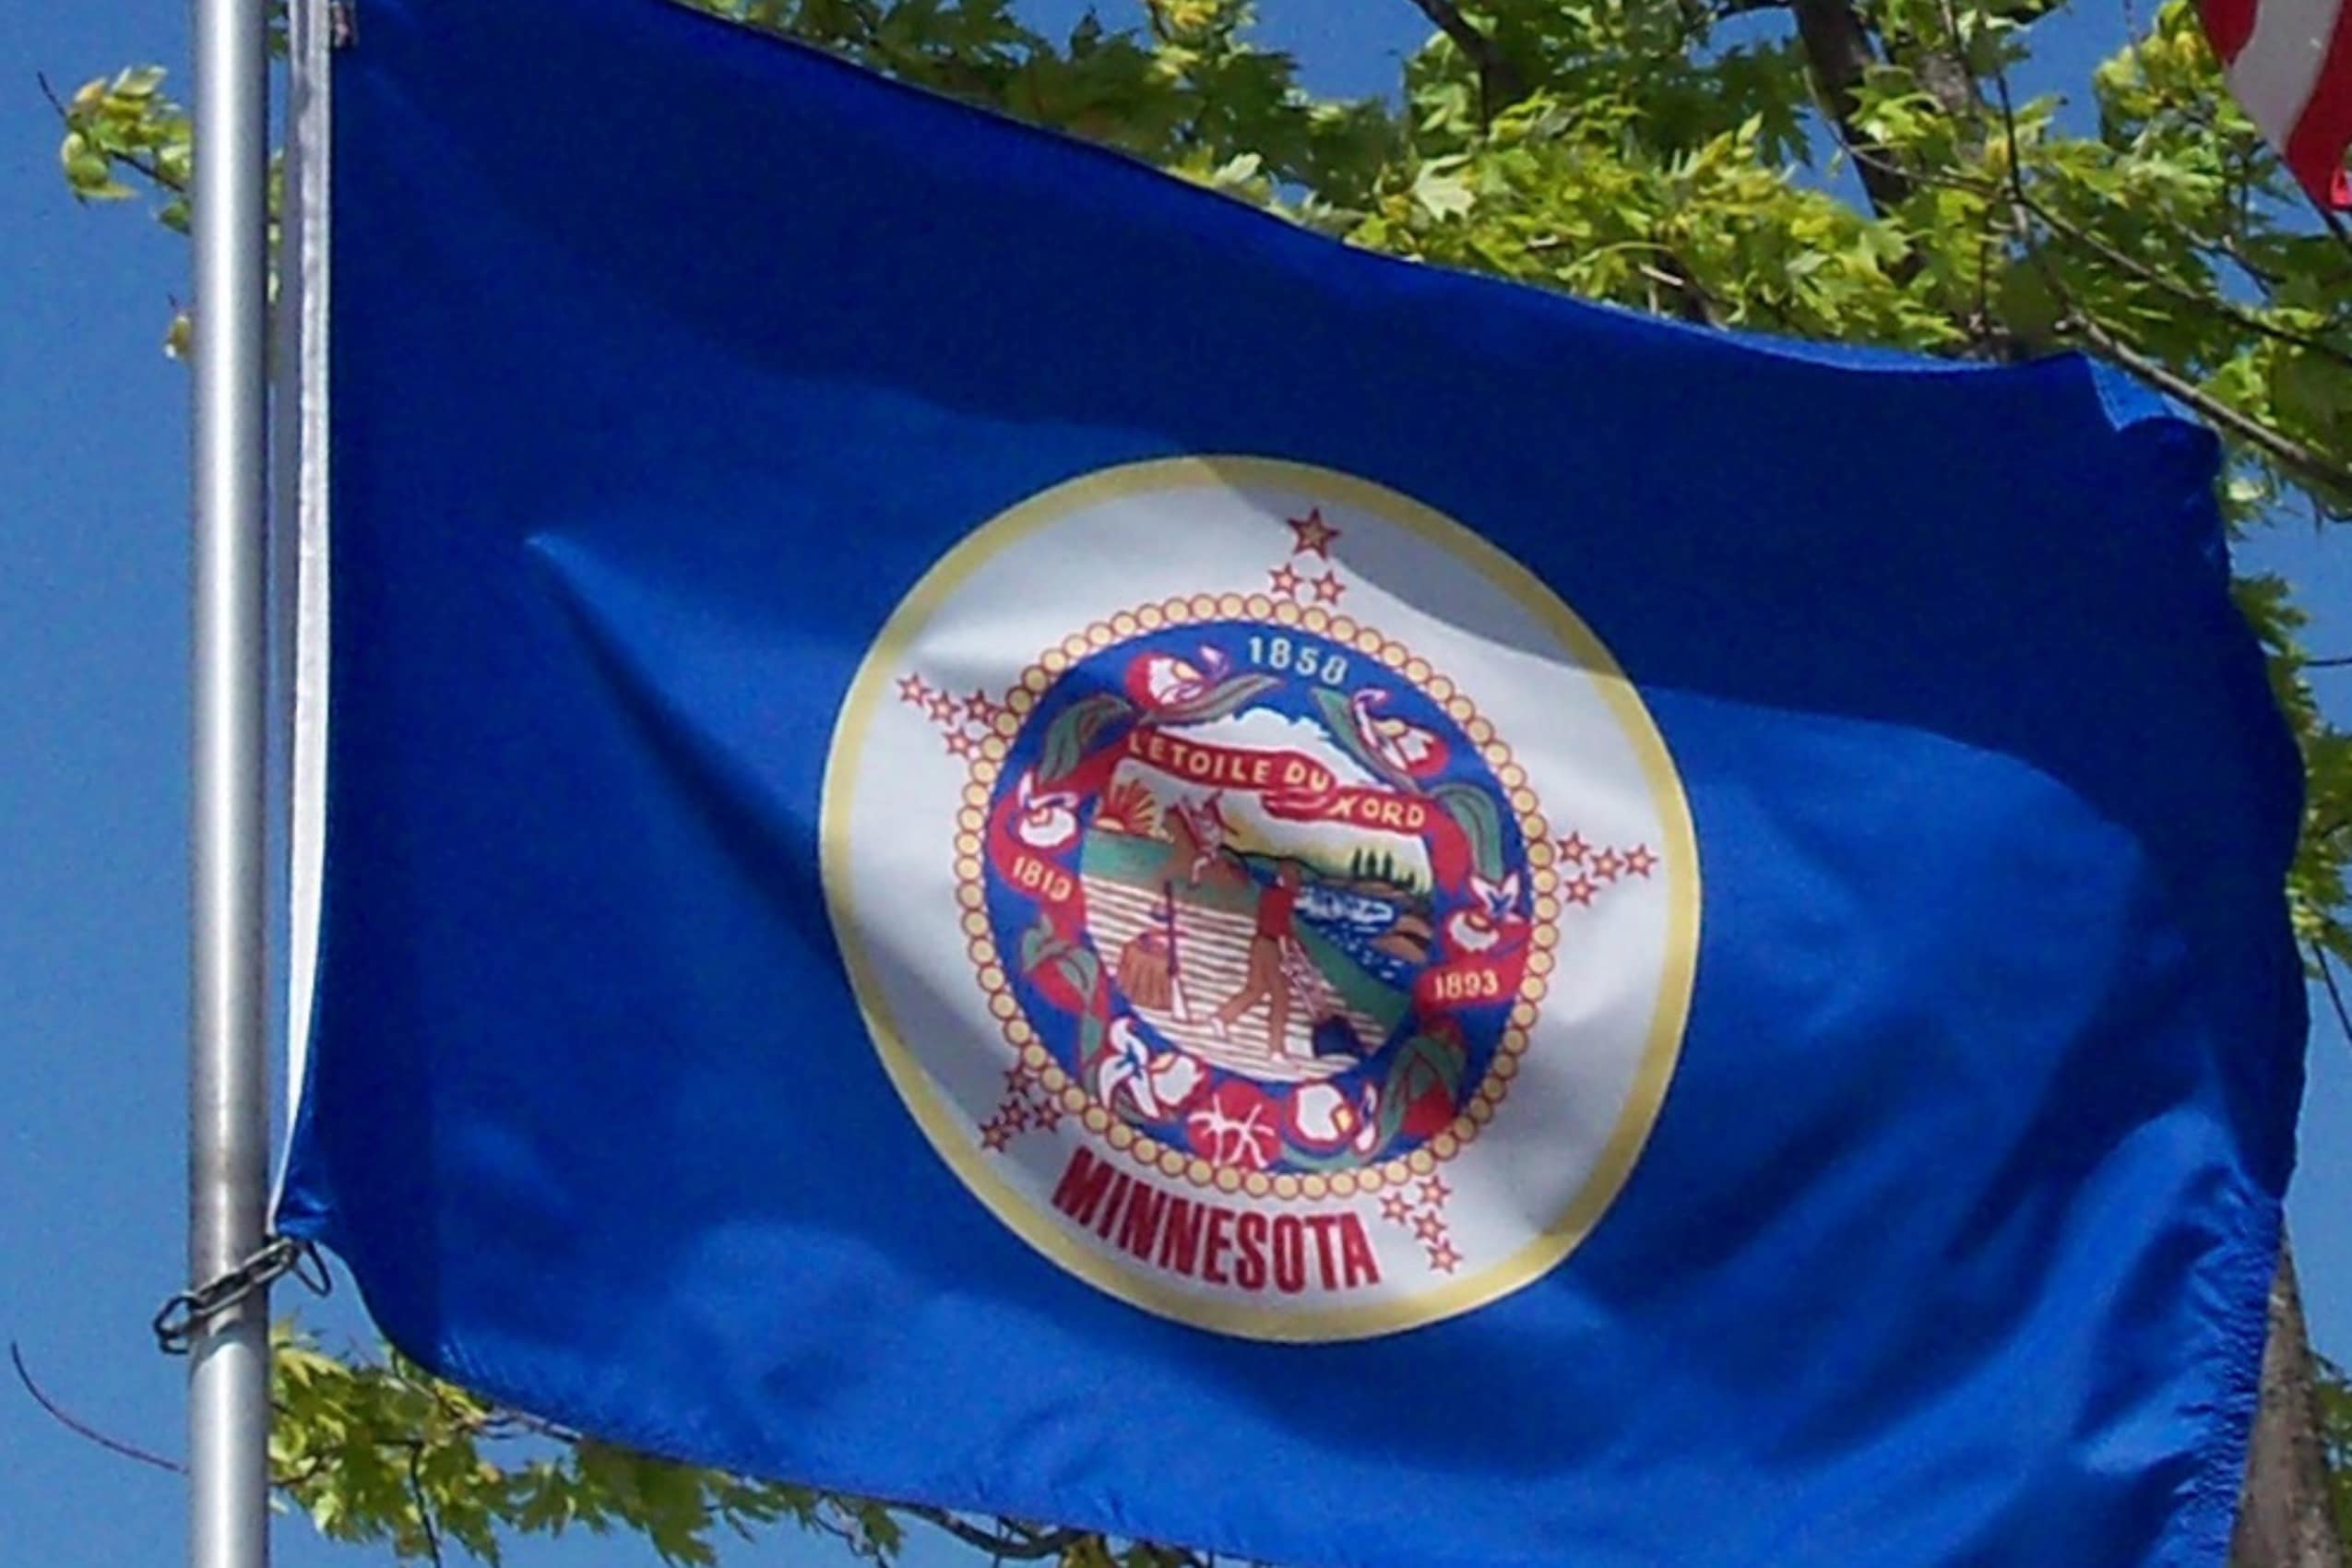 New state flag and seal become official today, Statehood Day